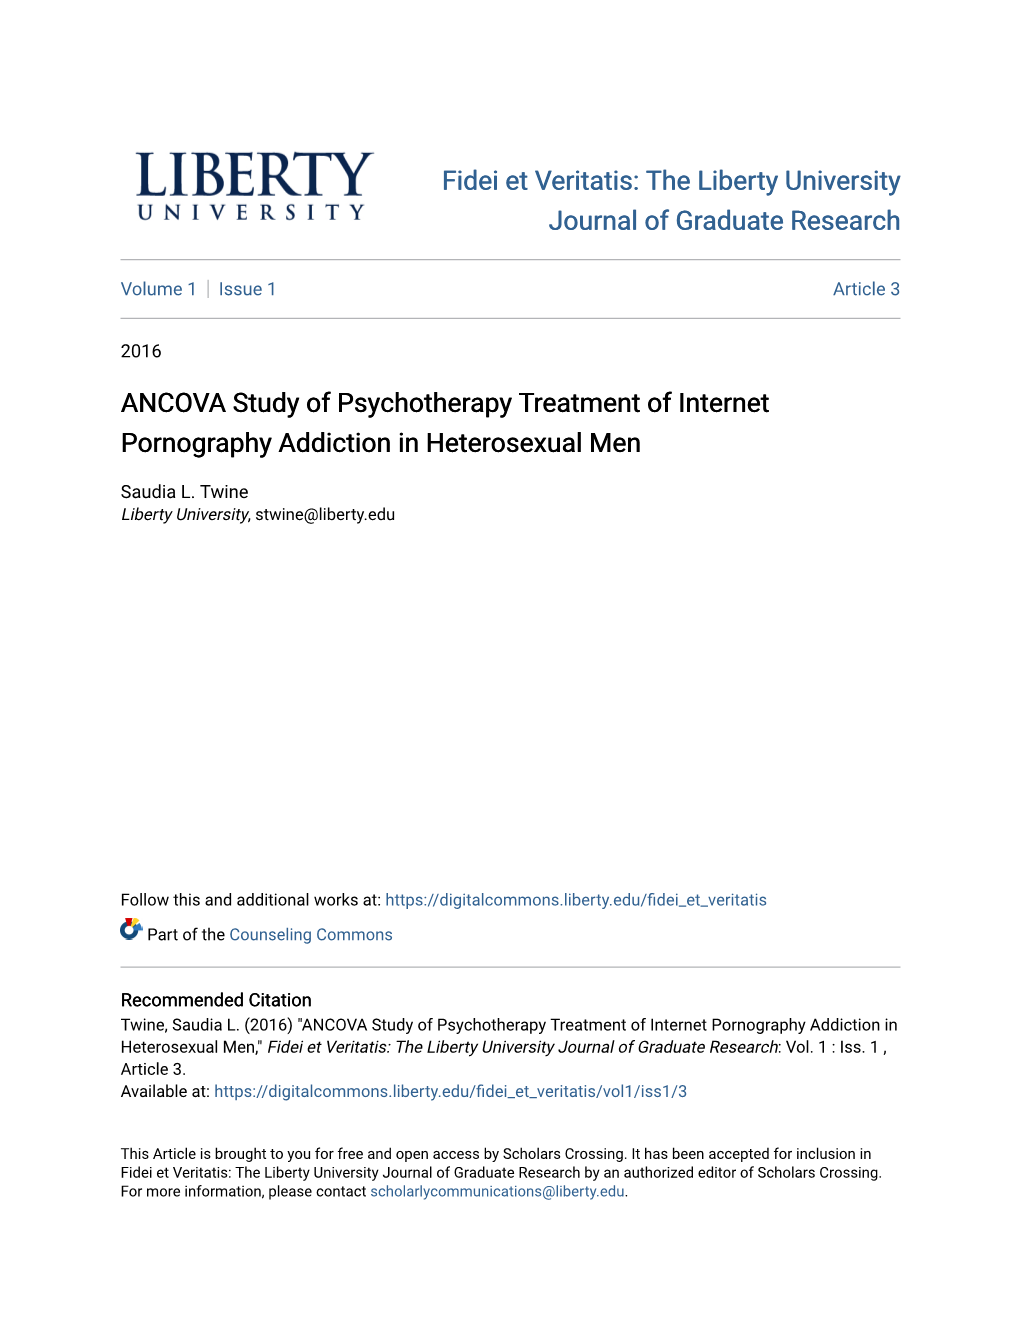 ANCOVA Study of Psychotherapy Treatment of Internet Pornography Addiction in Heterosexual Men